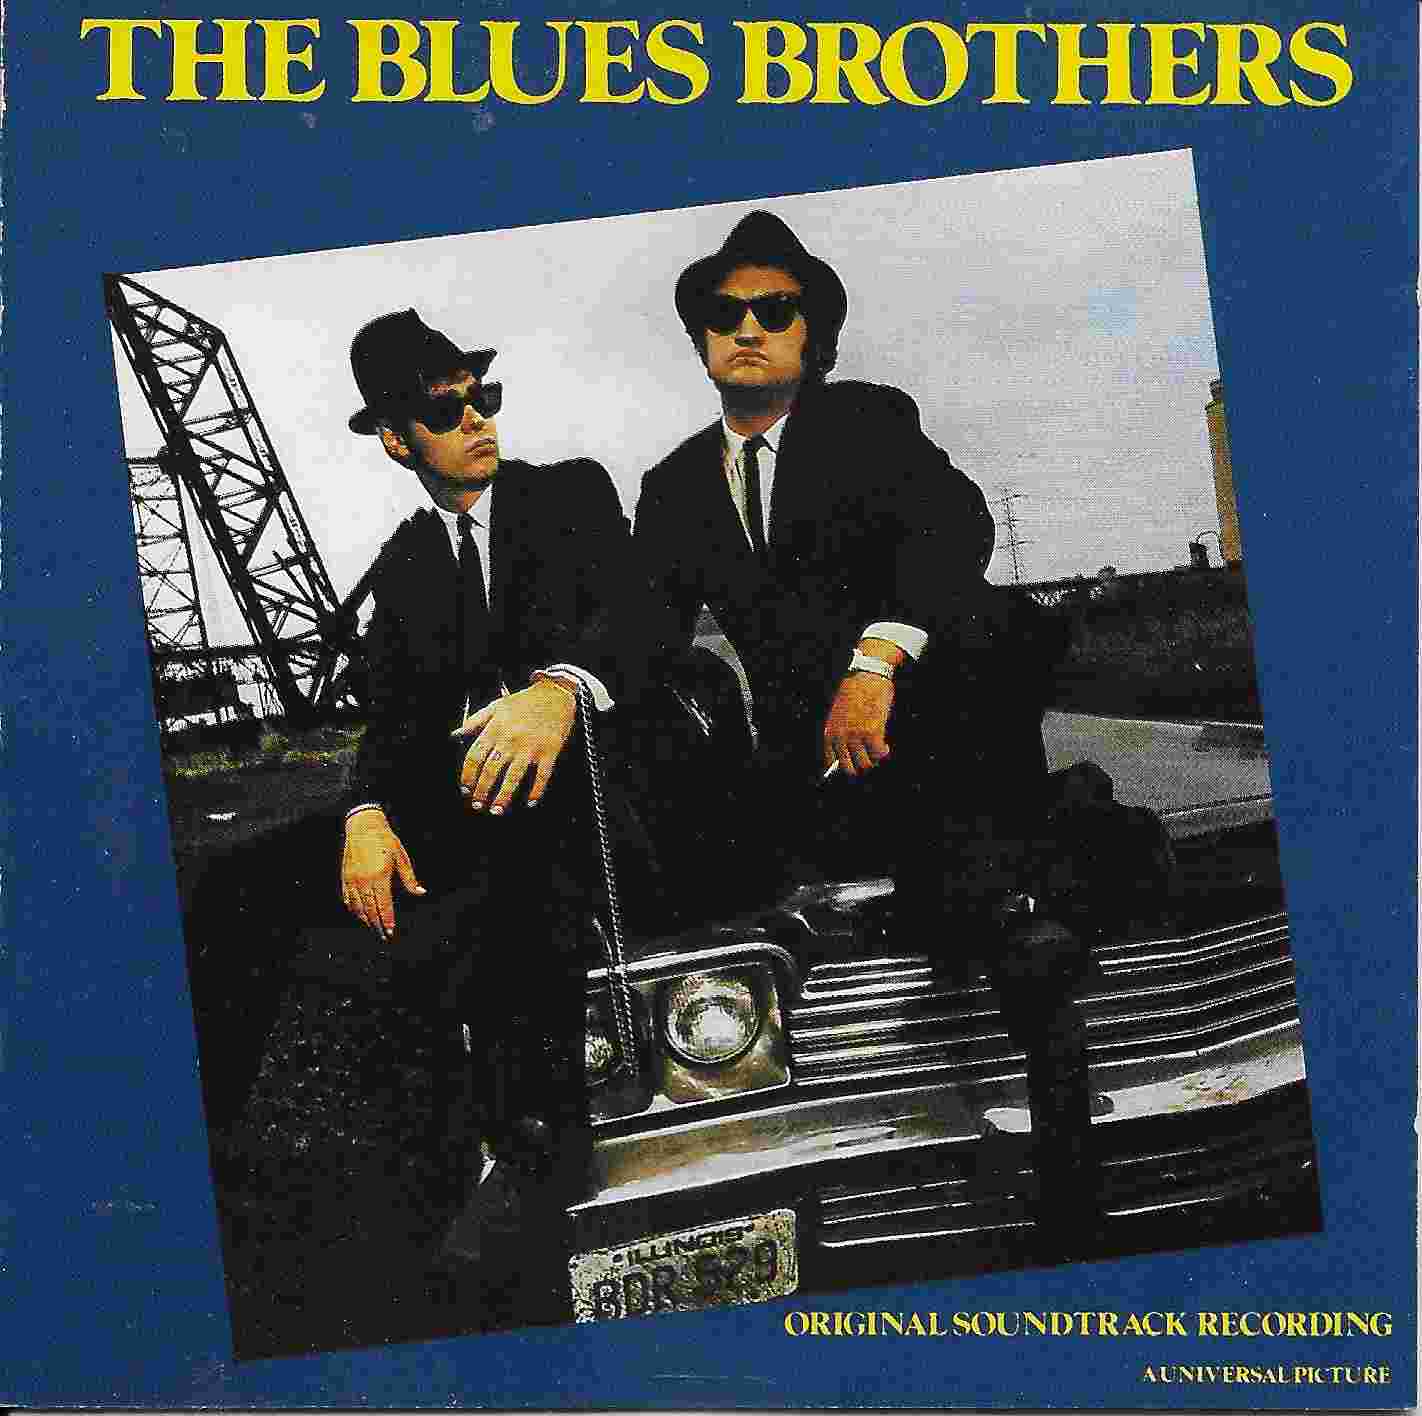 Picture of The blues brothers by artist Various from ITV, Channel 4 and Channel 5 cds library